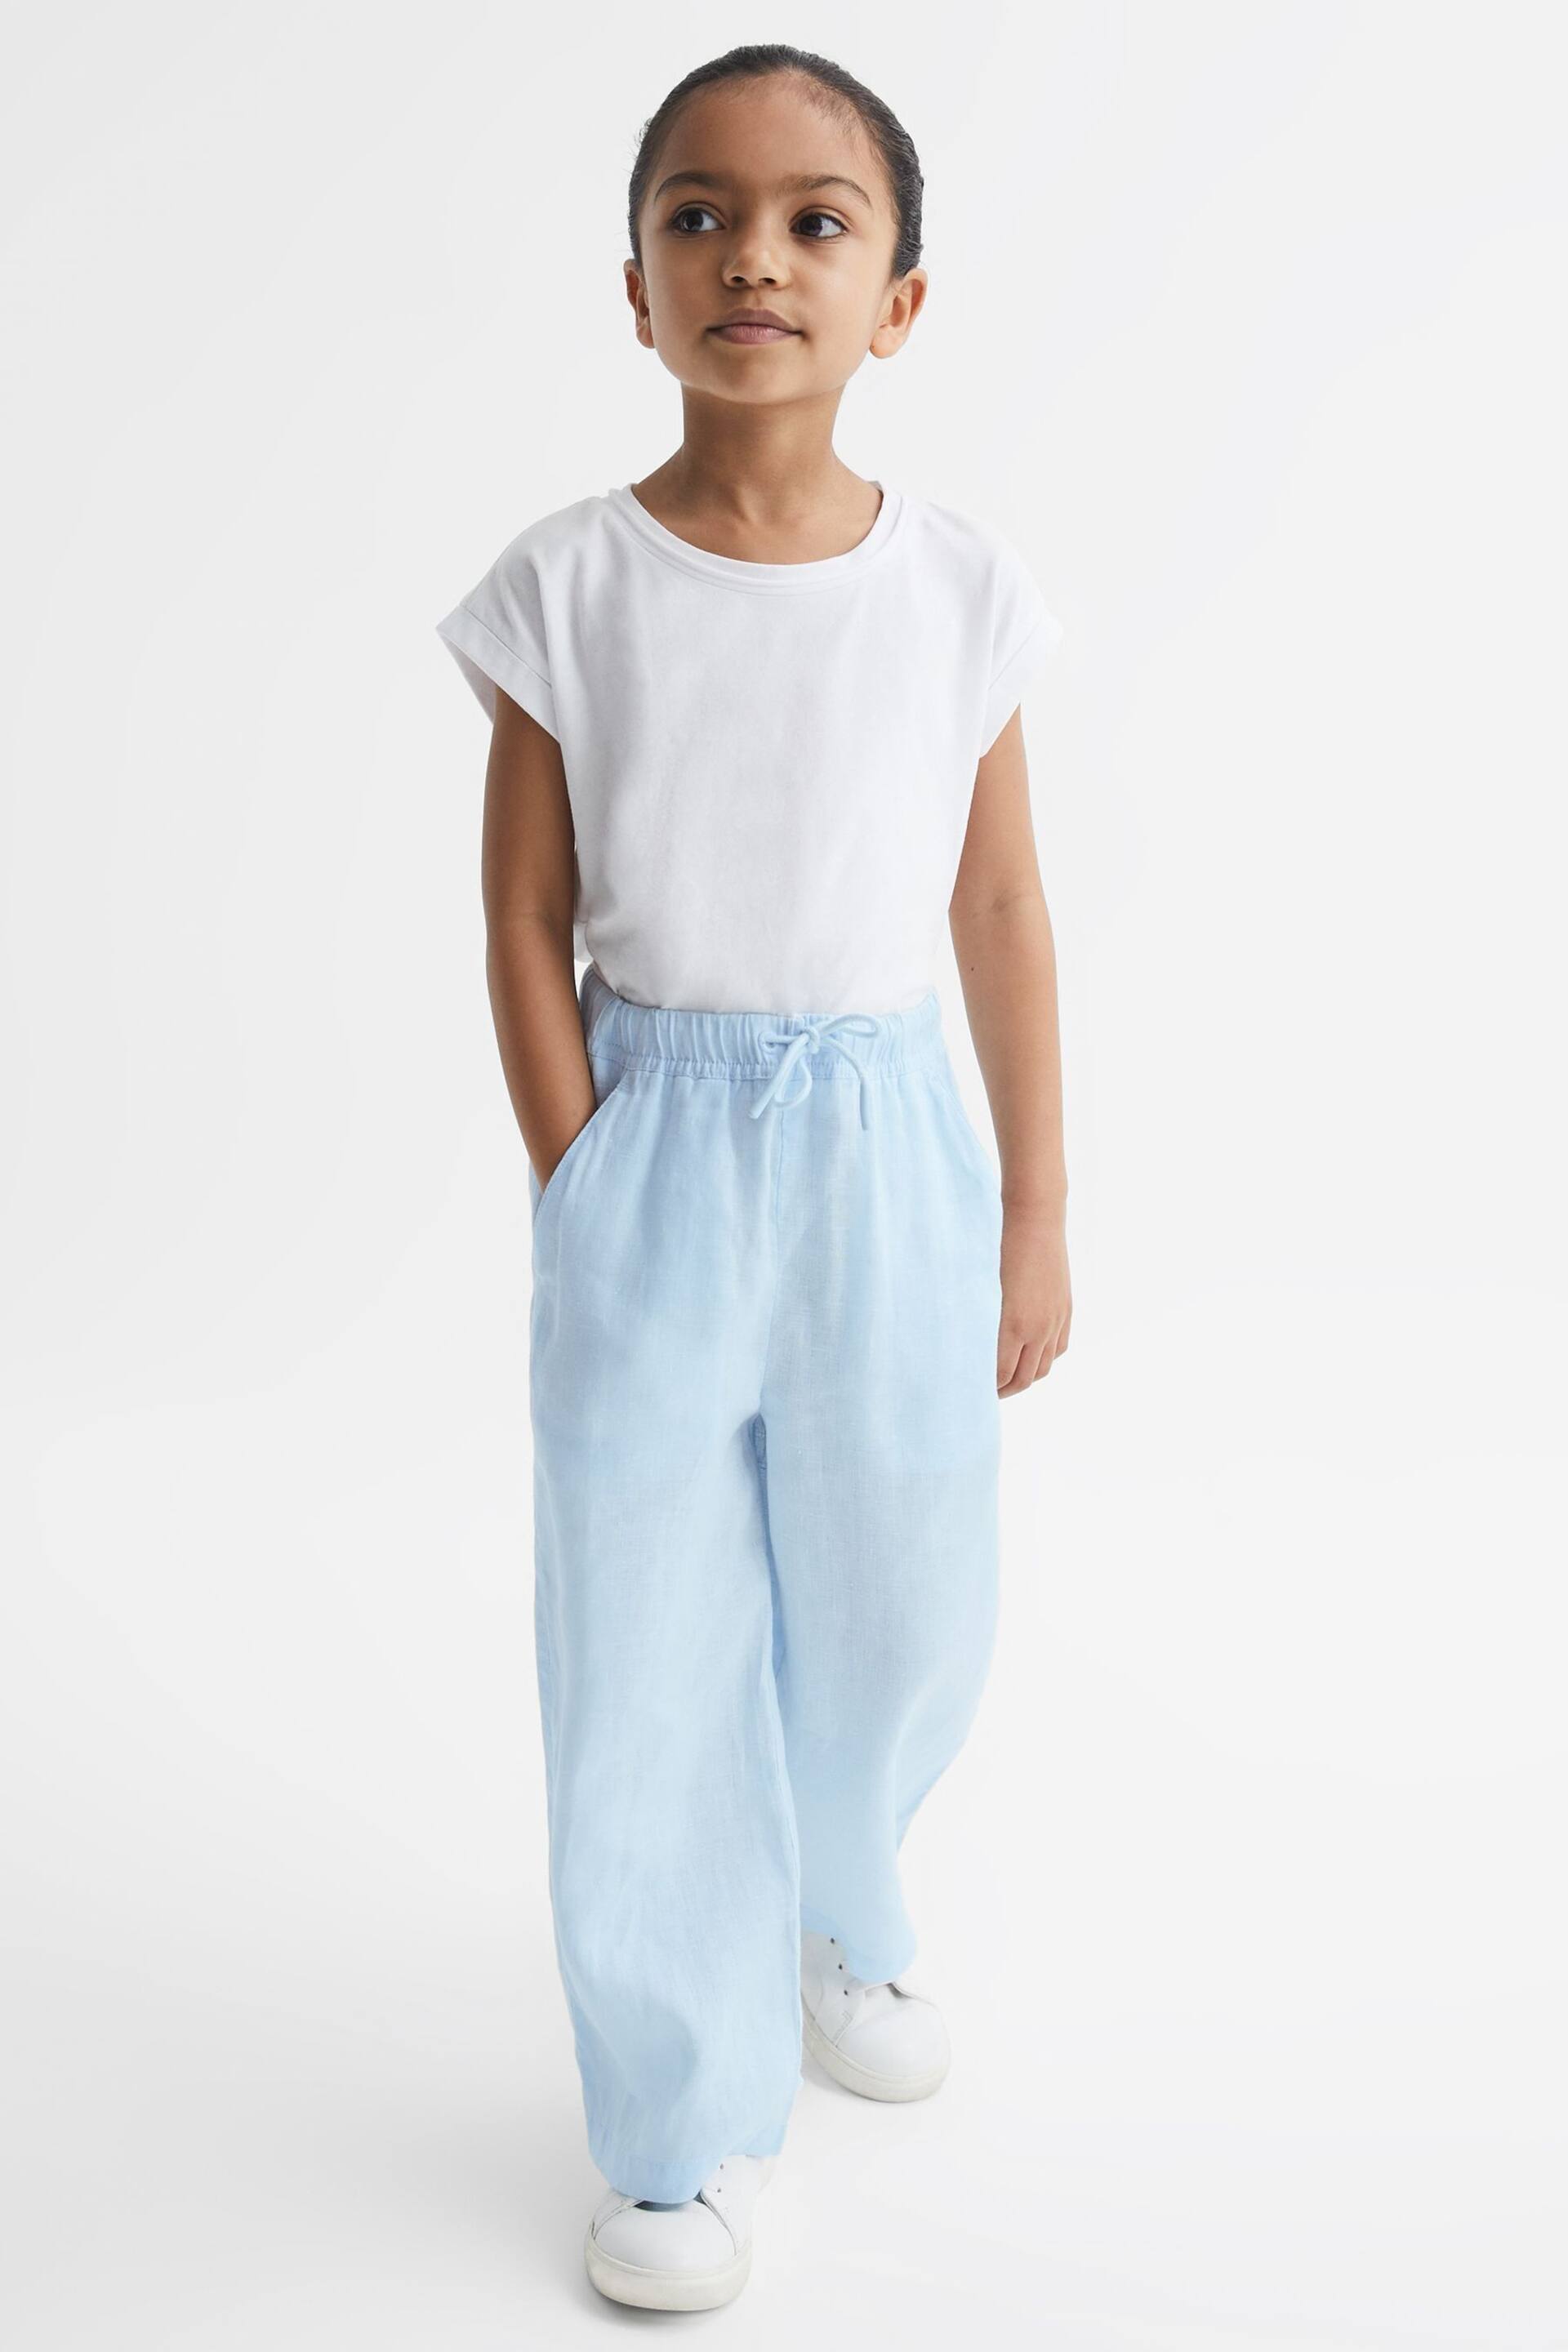 Reiss Ice Blue Cleo Junior Linen Drawstring Trousers - Image 1 of 6